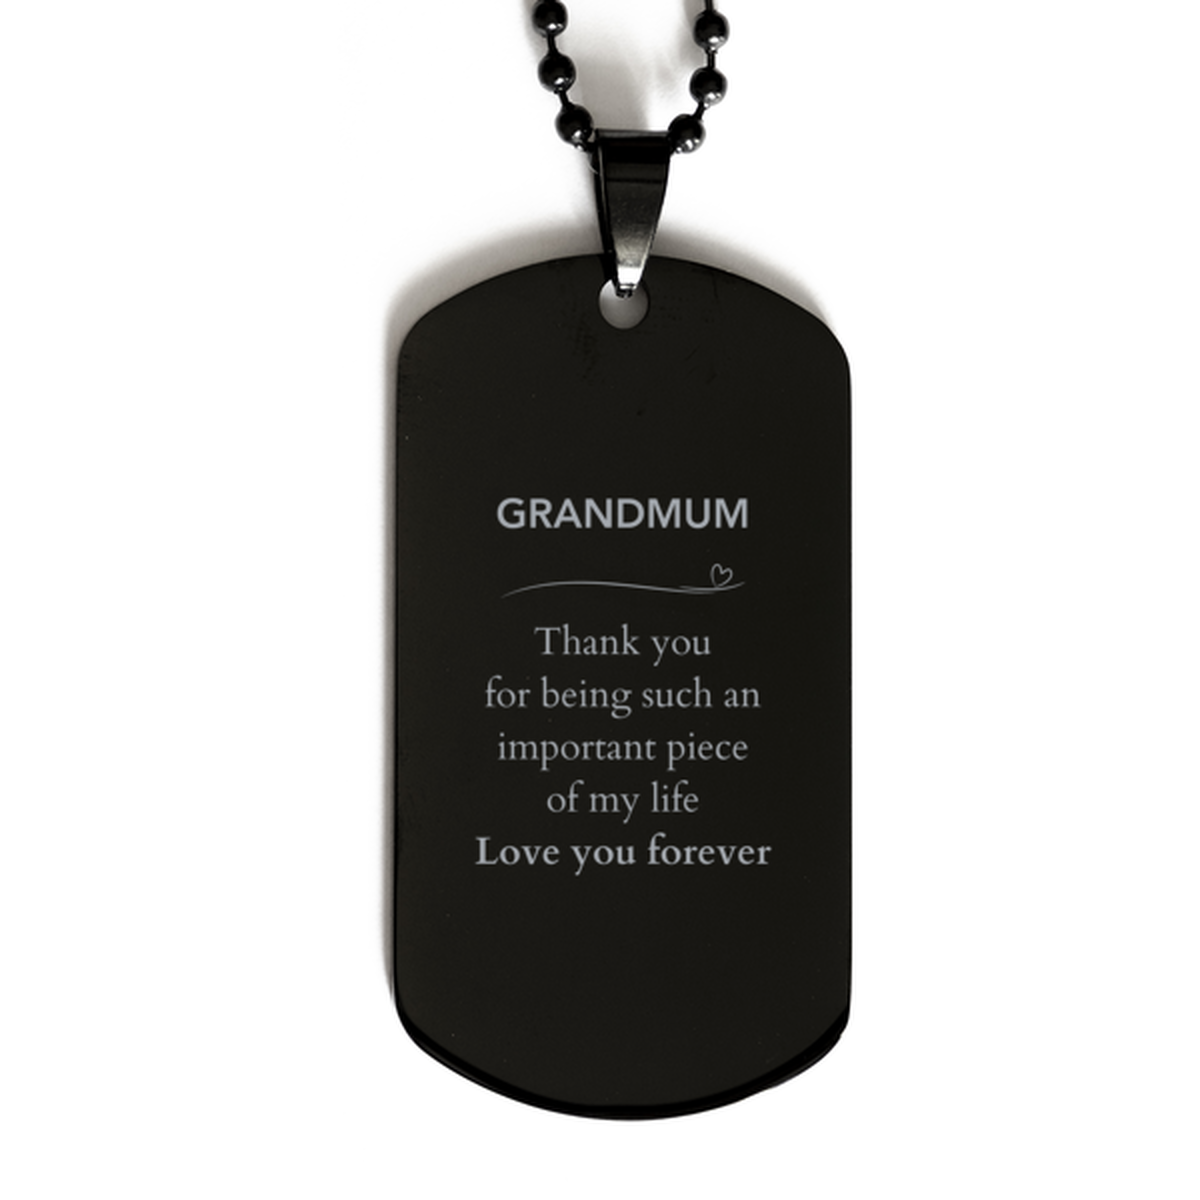 Appropriate Grandmum Black Dog Tag Epic Birthday Gifts for Grandmum Thank you for being such an important piece of my life Grandmum Christmas Mothers Fathers Day